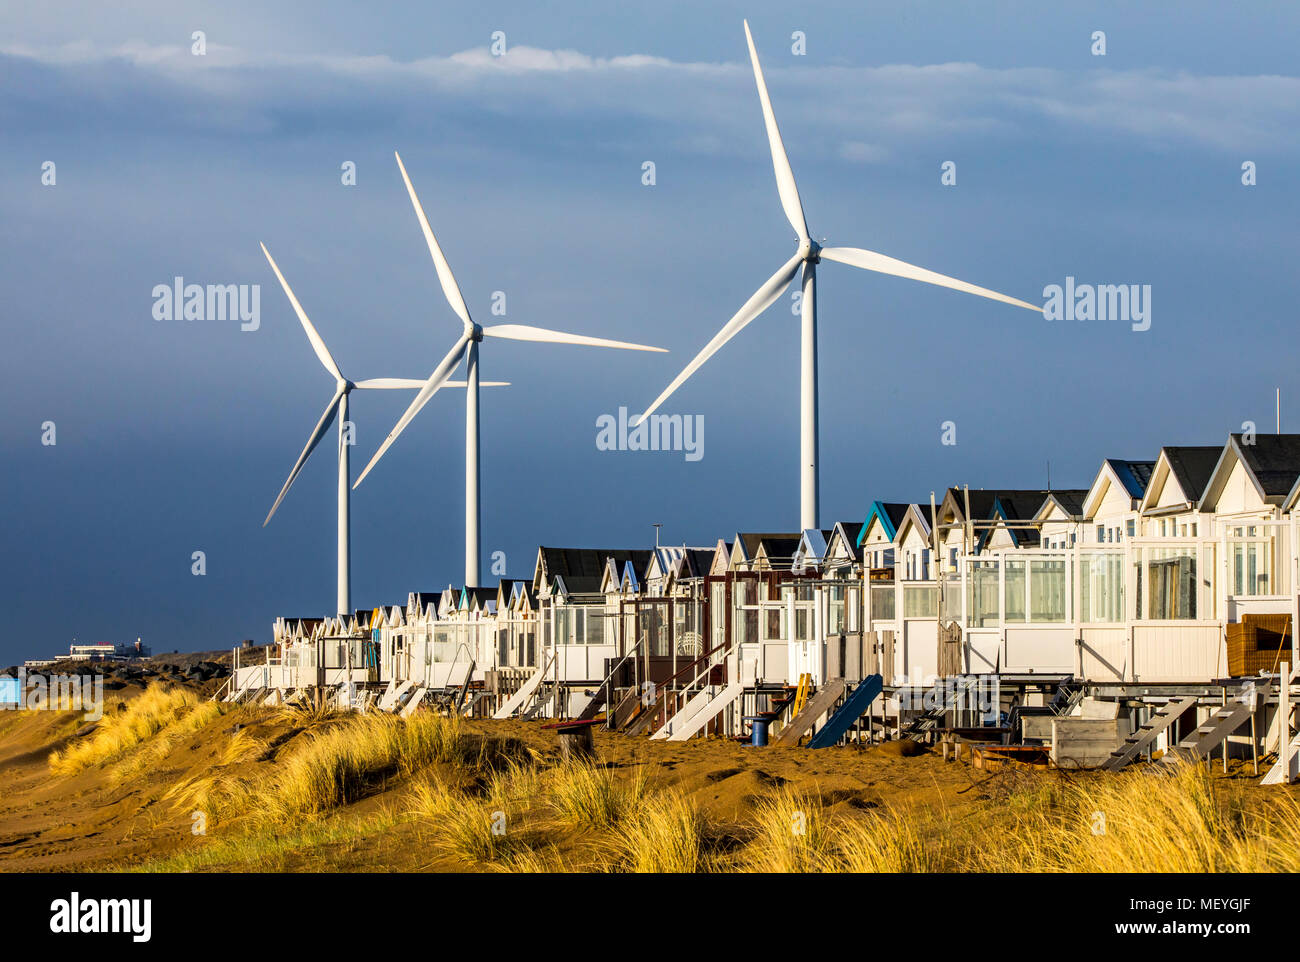 Wind Turbines Wind Farm Cottages Beach Houses On The Beach Of